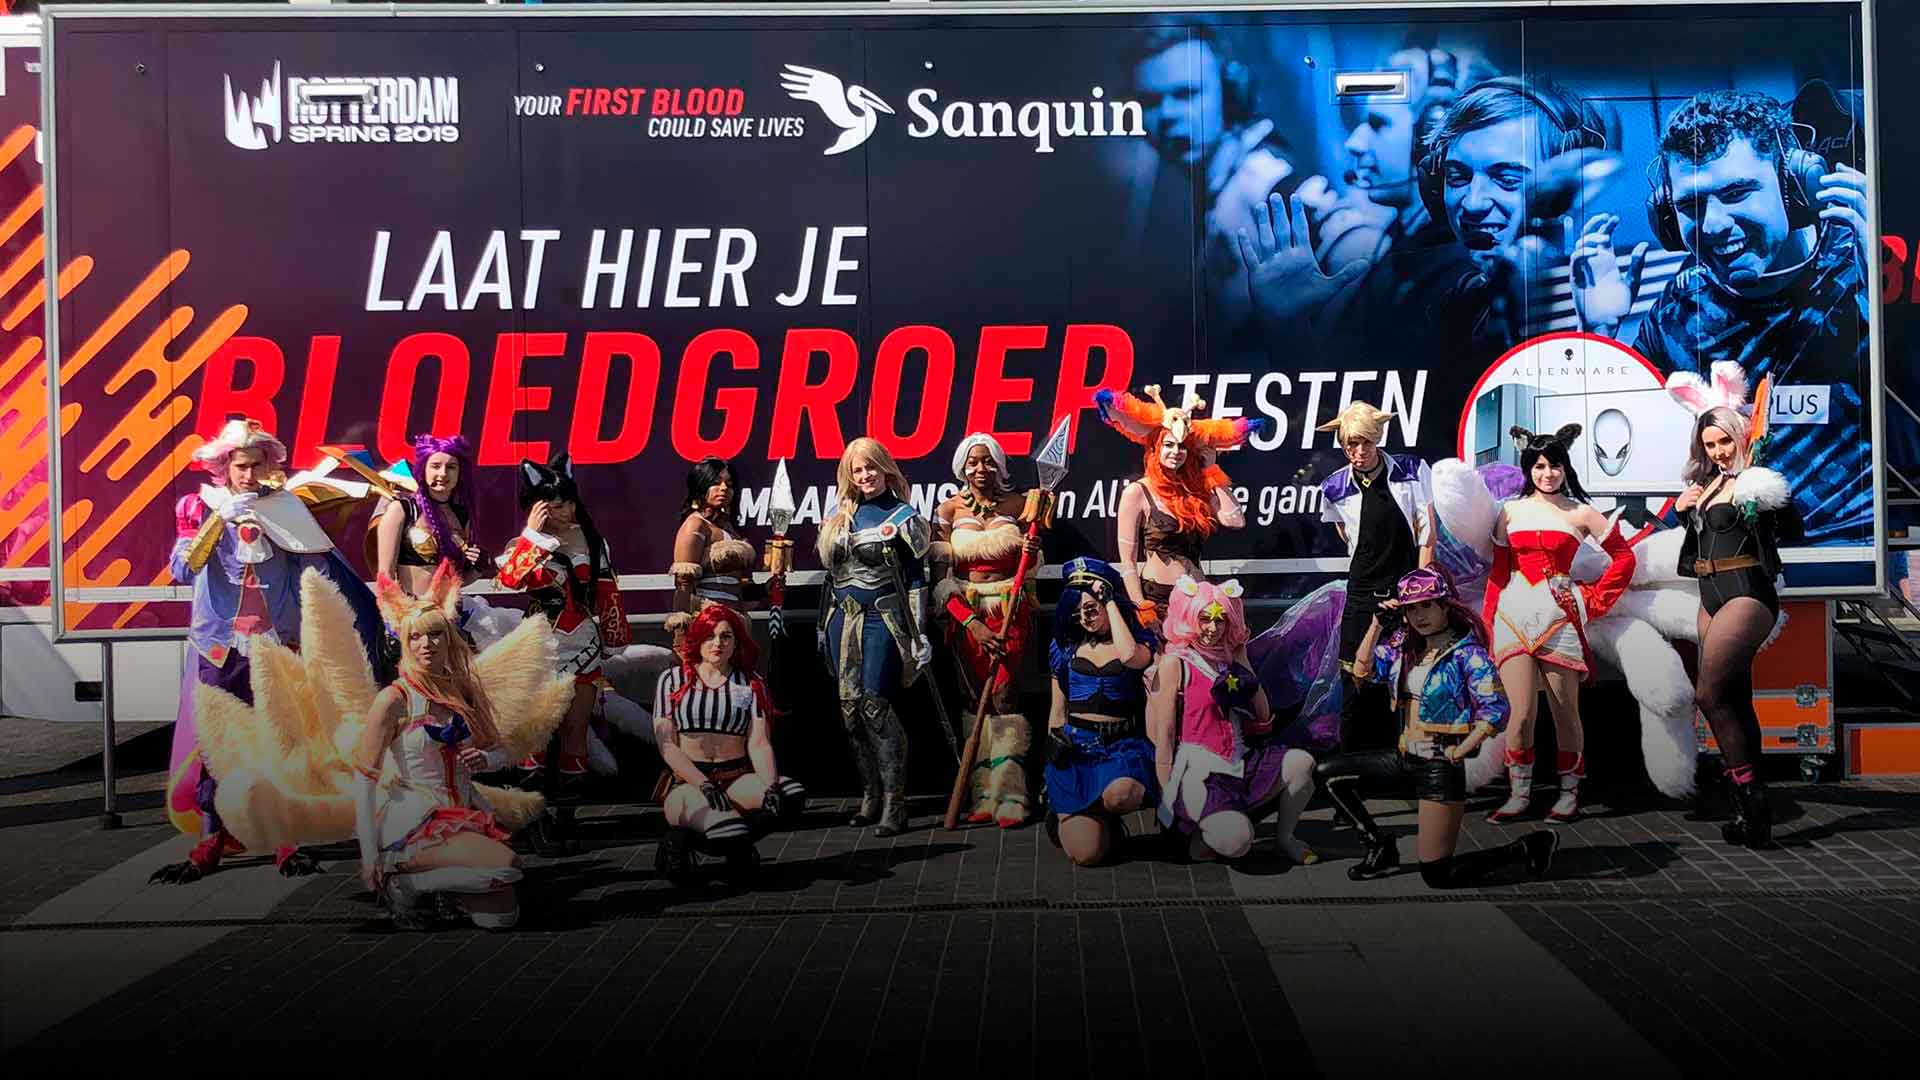 LoL to the rescue in een esports campagne die levens redt - Johan Cruyff Academy